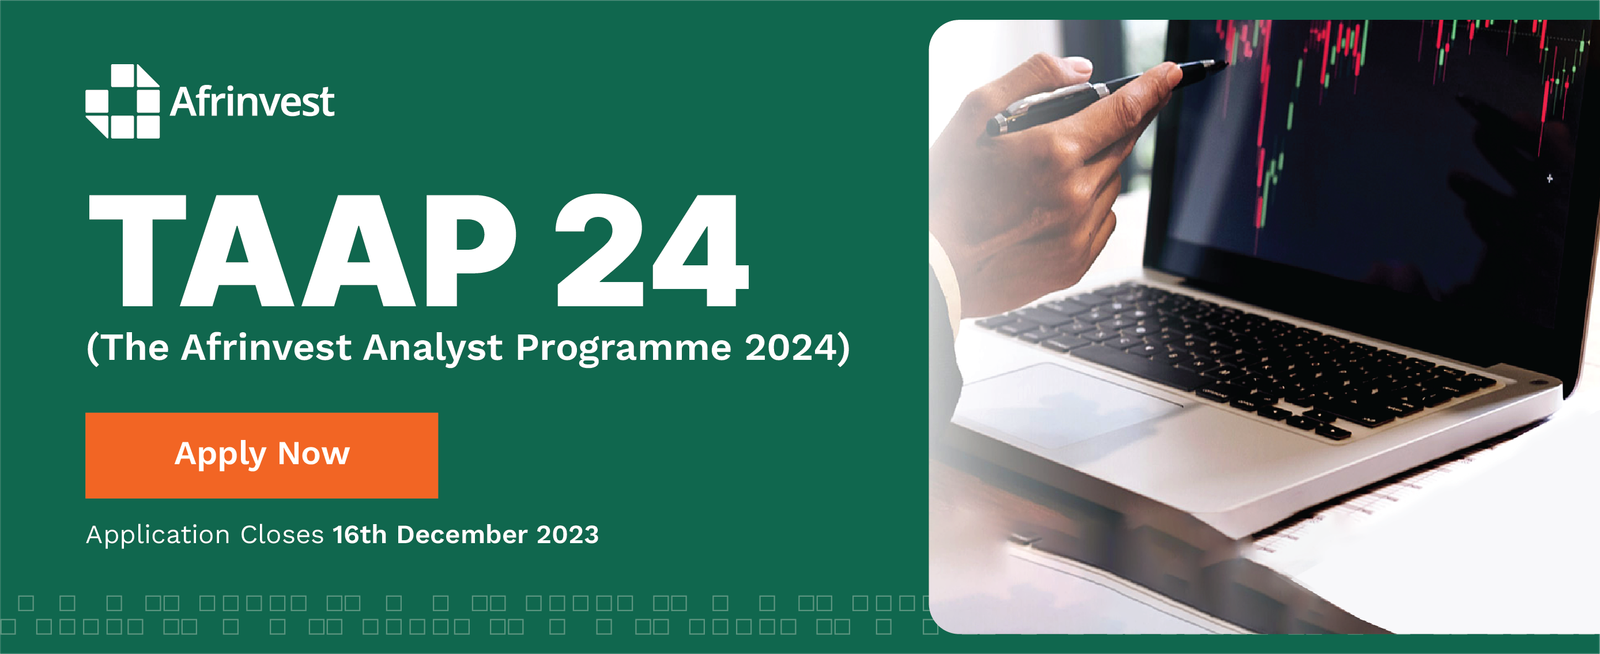 Now is the time to apply: Young Nigerians Can Participate in the Afrinvest Analyst Programme